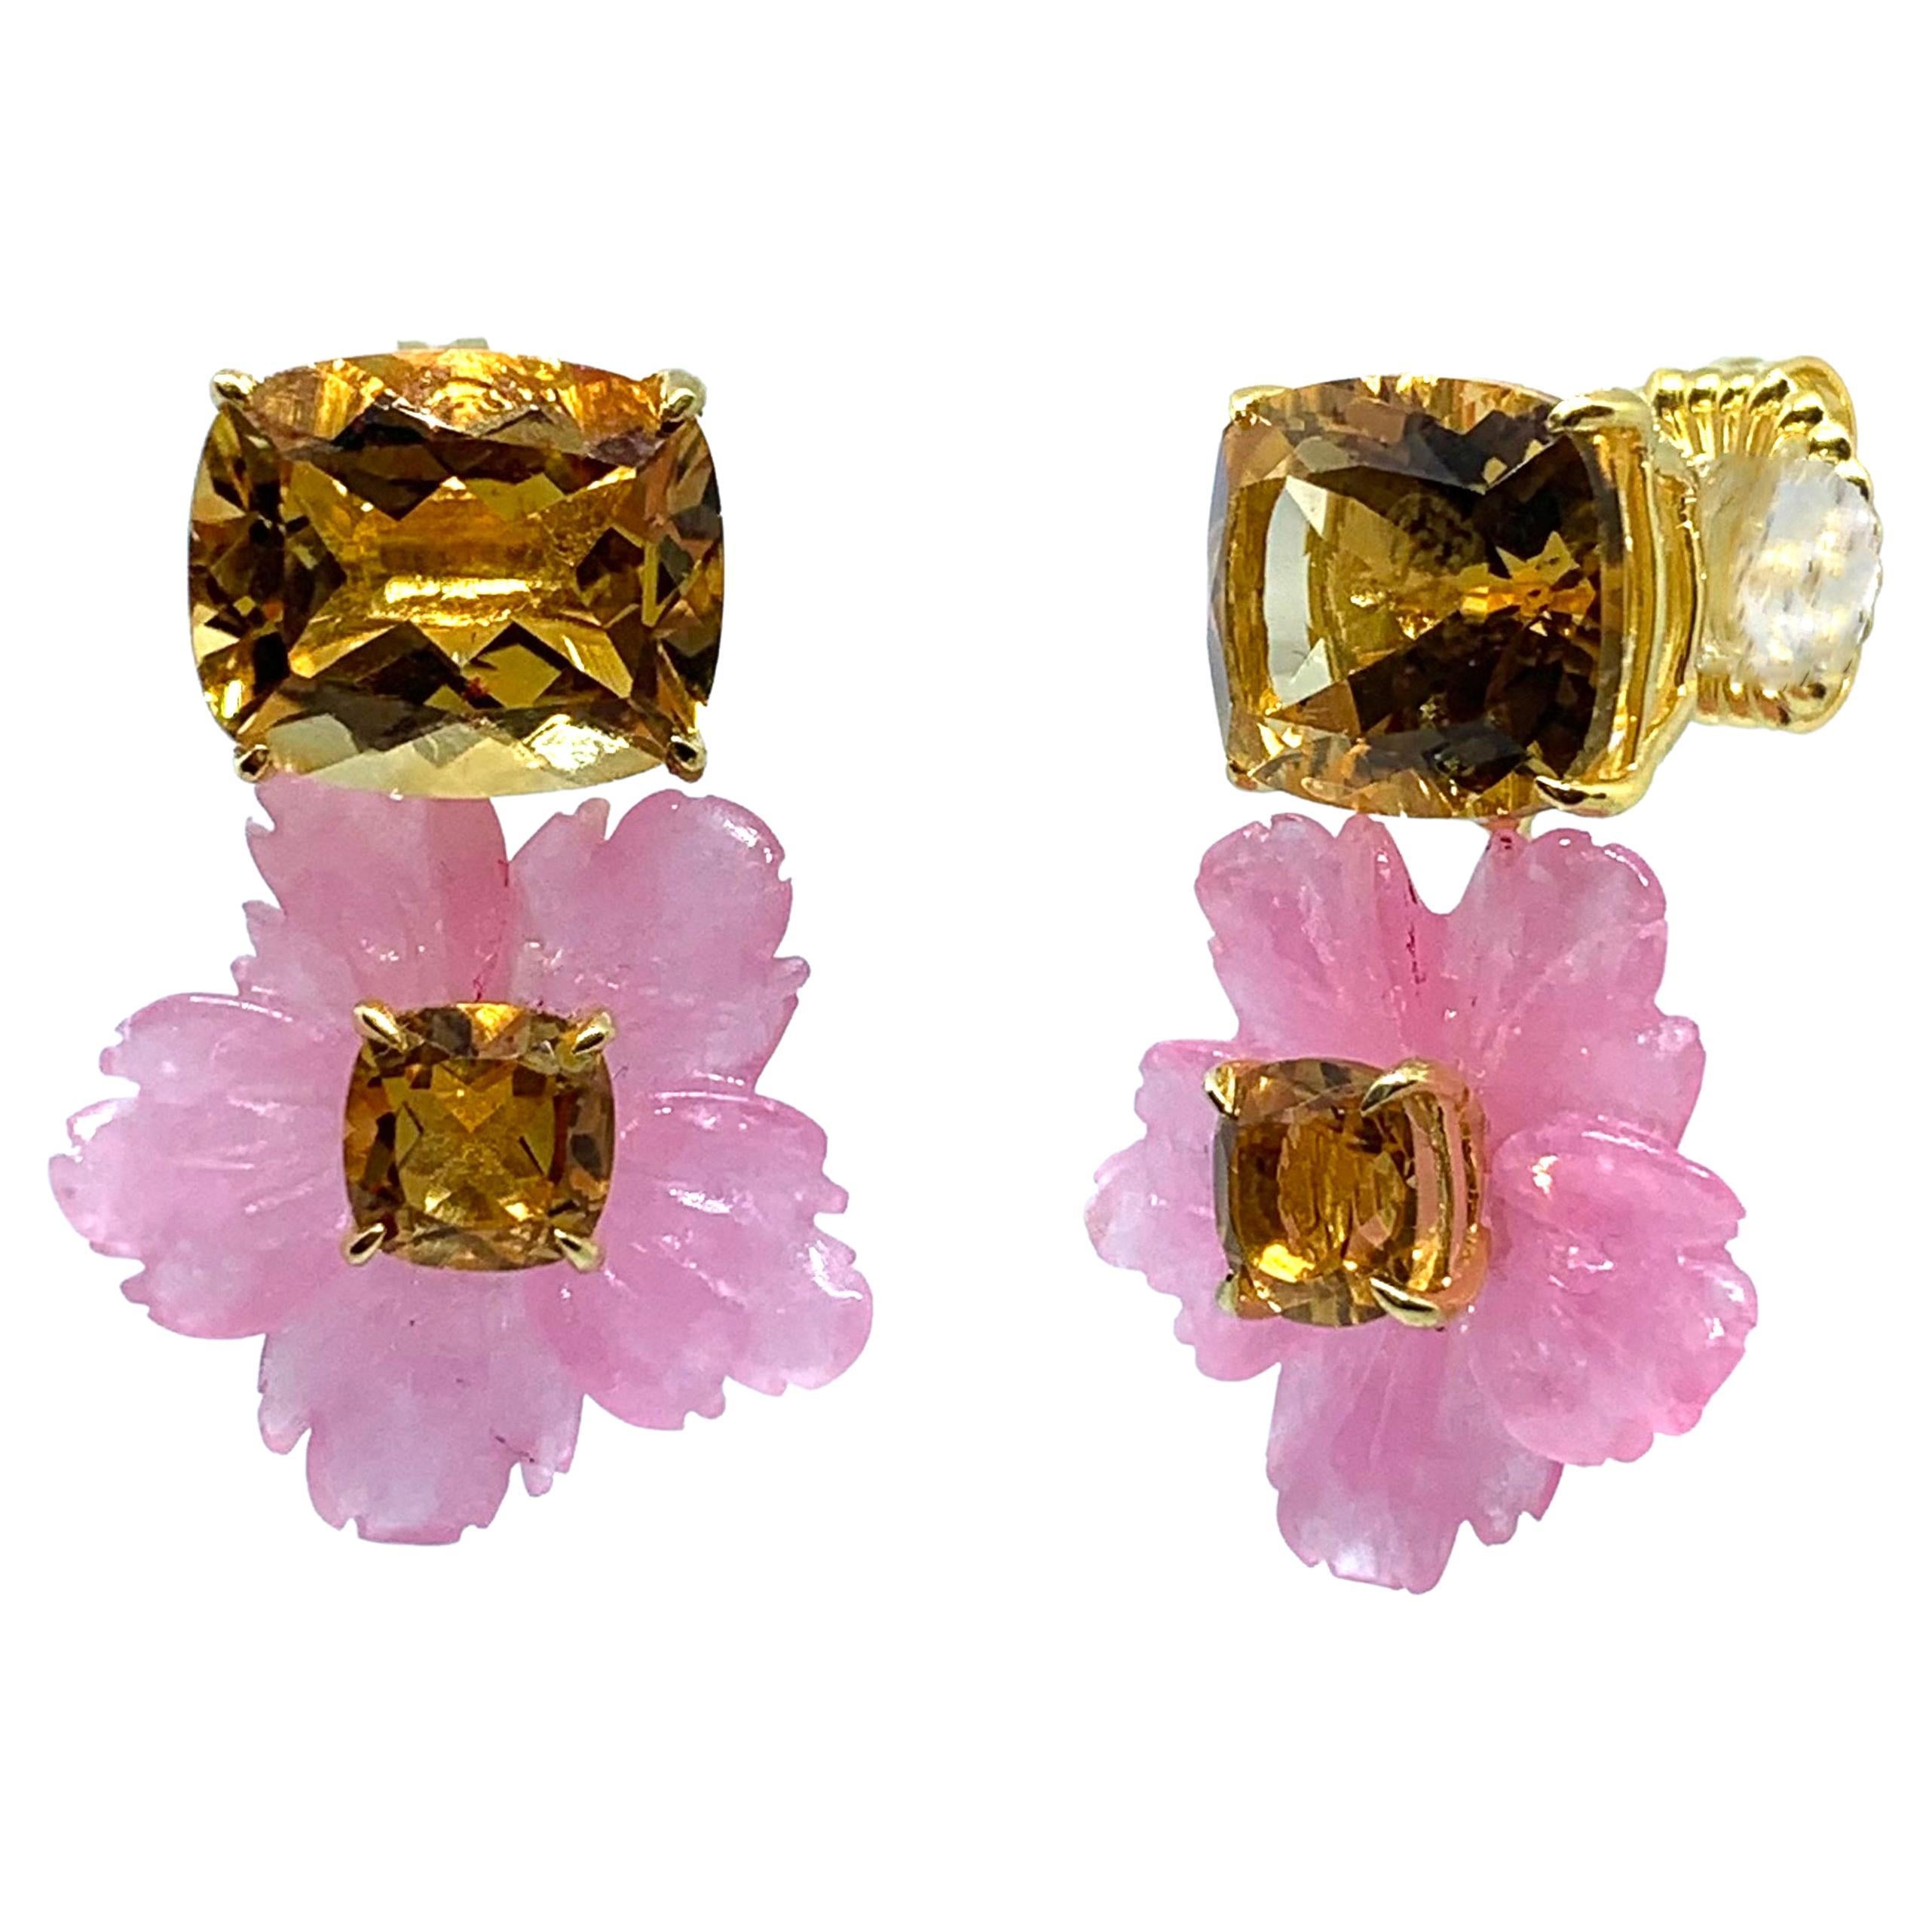 Stunning Cushion-cut Citrine and Carved Pink Quartzite Flower Drop Earrings